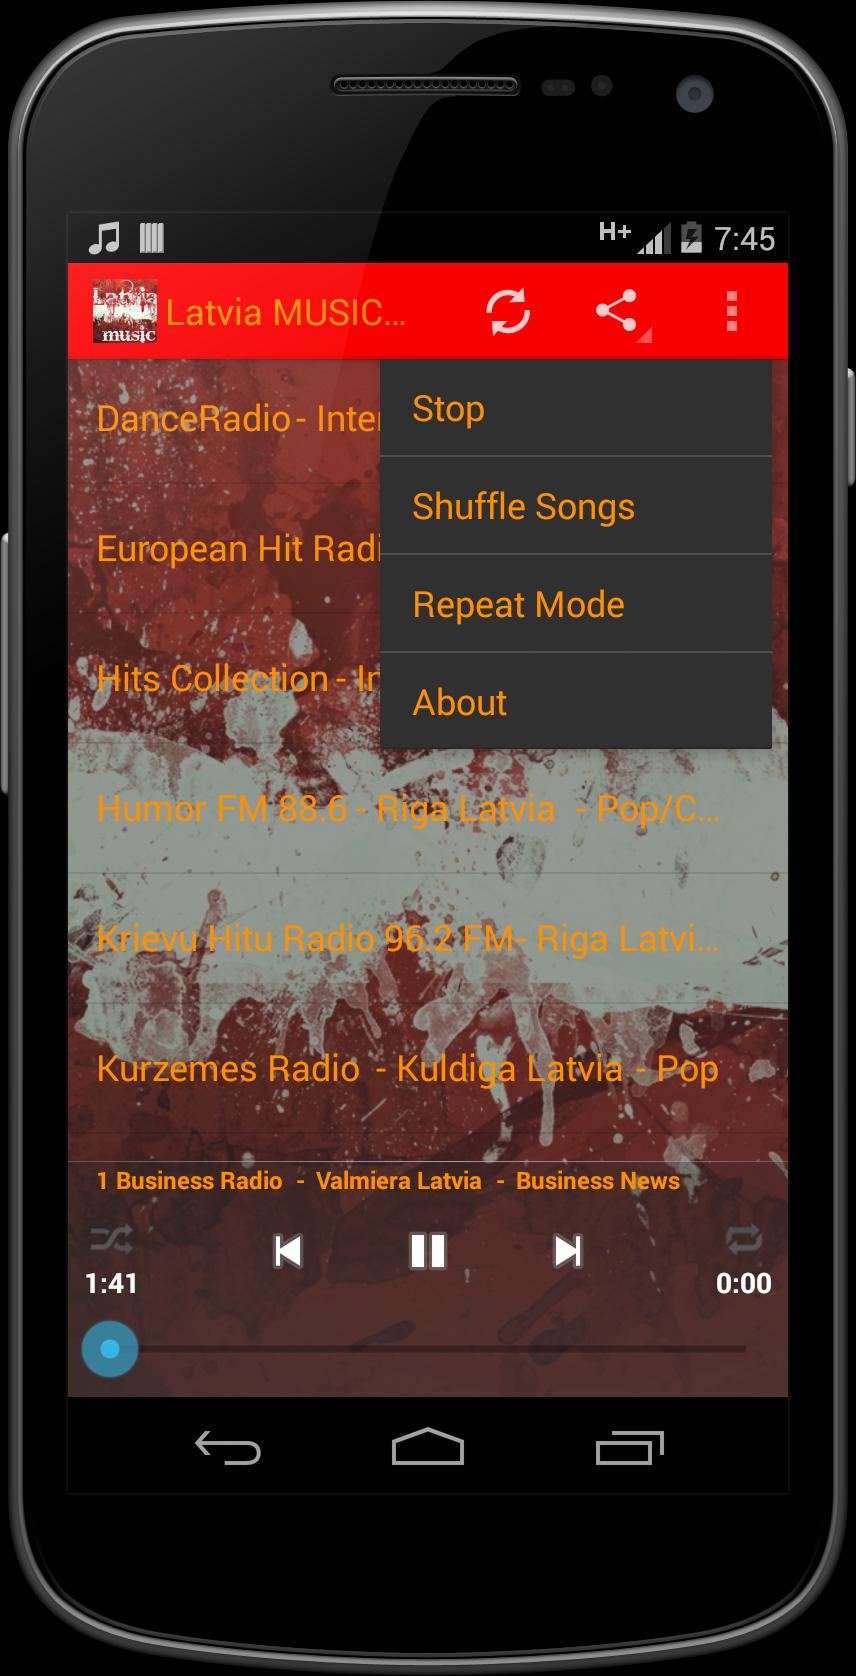 Latvia MUSIC Radio for Android - APK Download